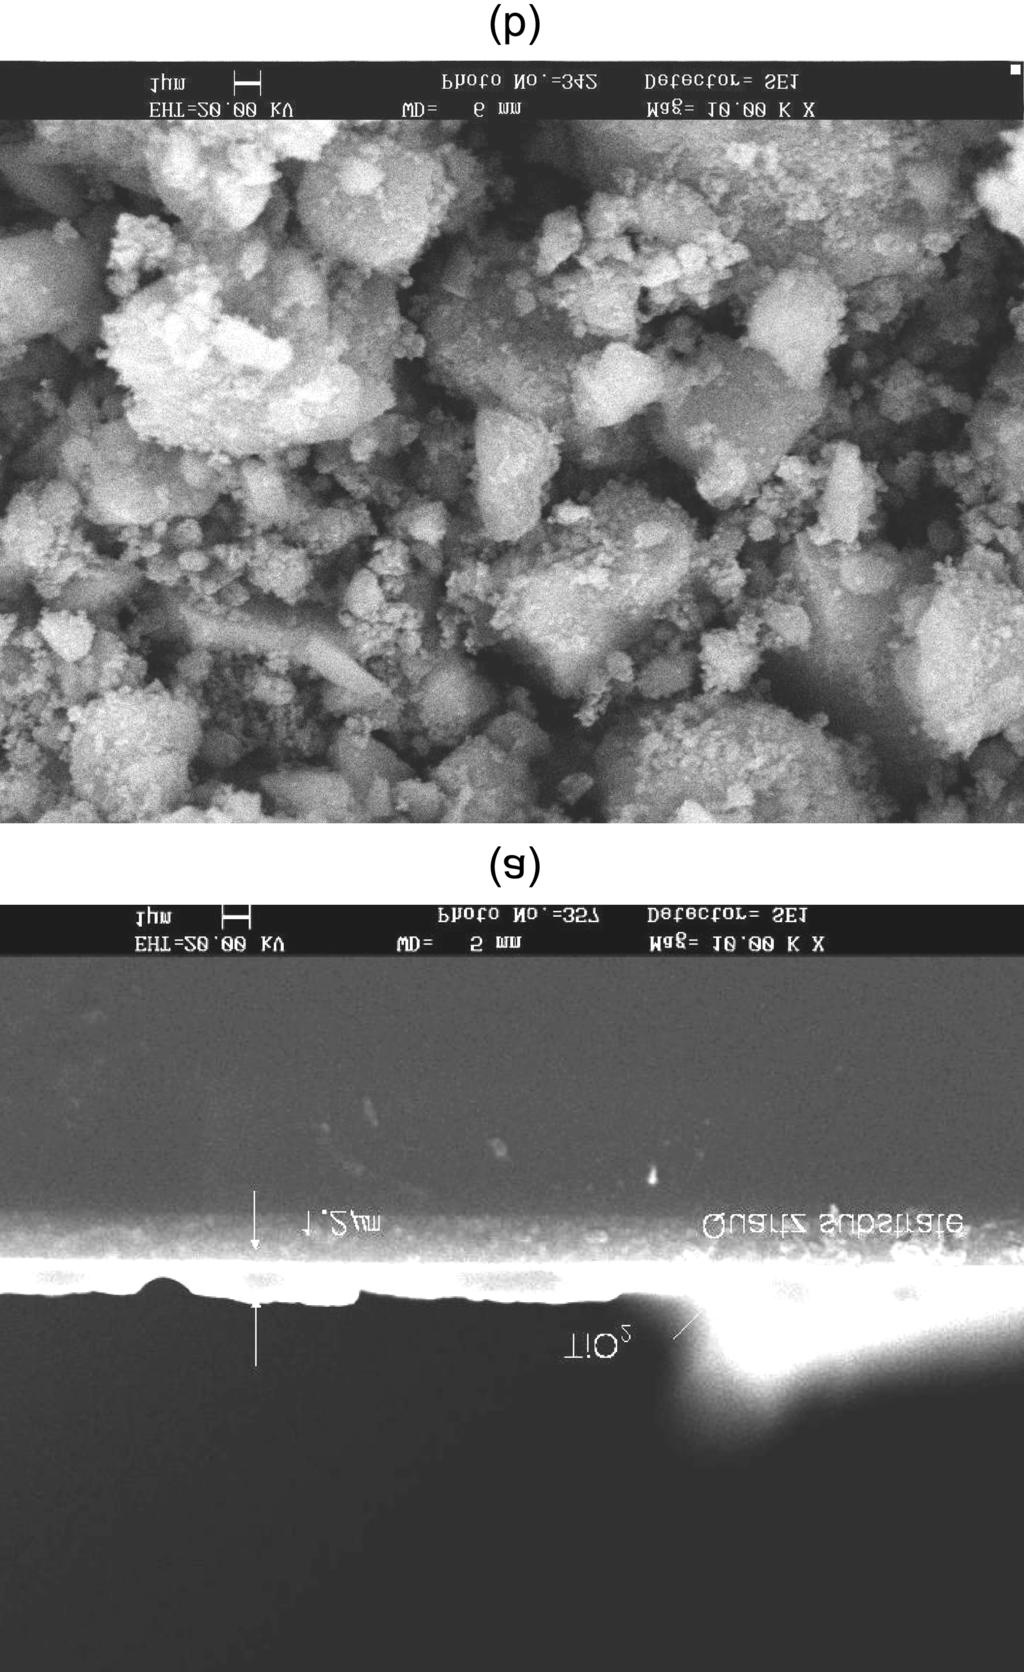 From the SEM photograph, it could be verified that coating depth was about 1.2 µm and catalysts were evenly coated.